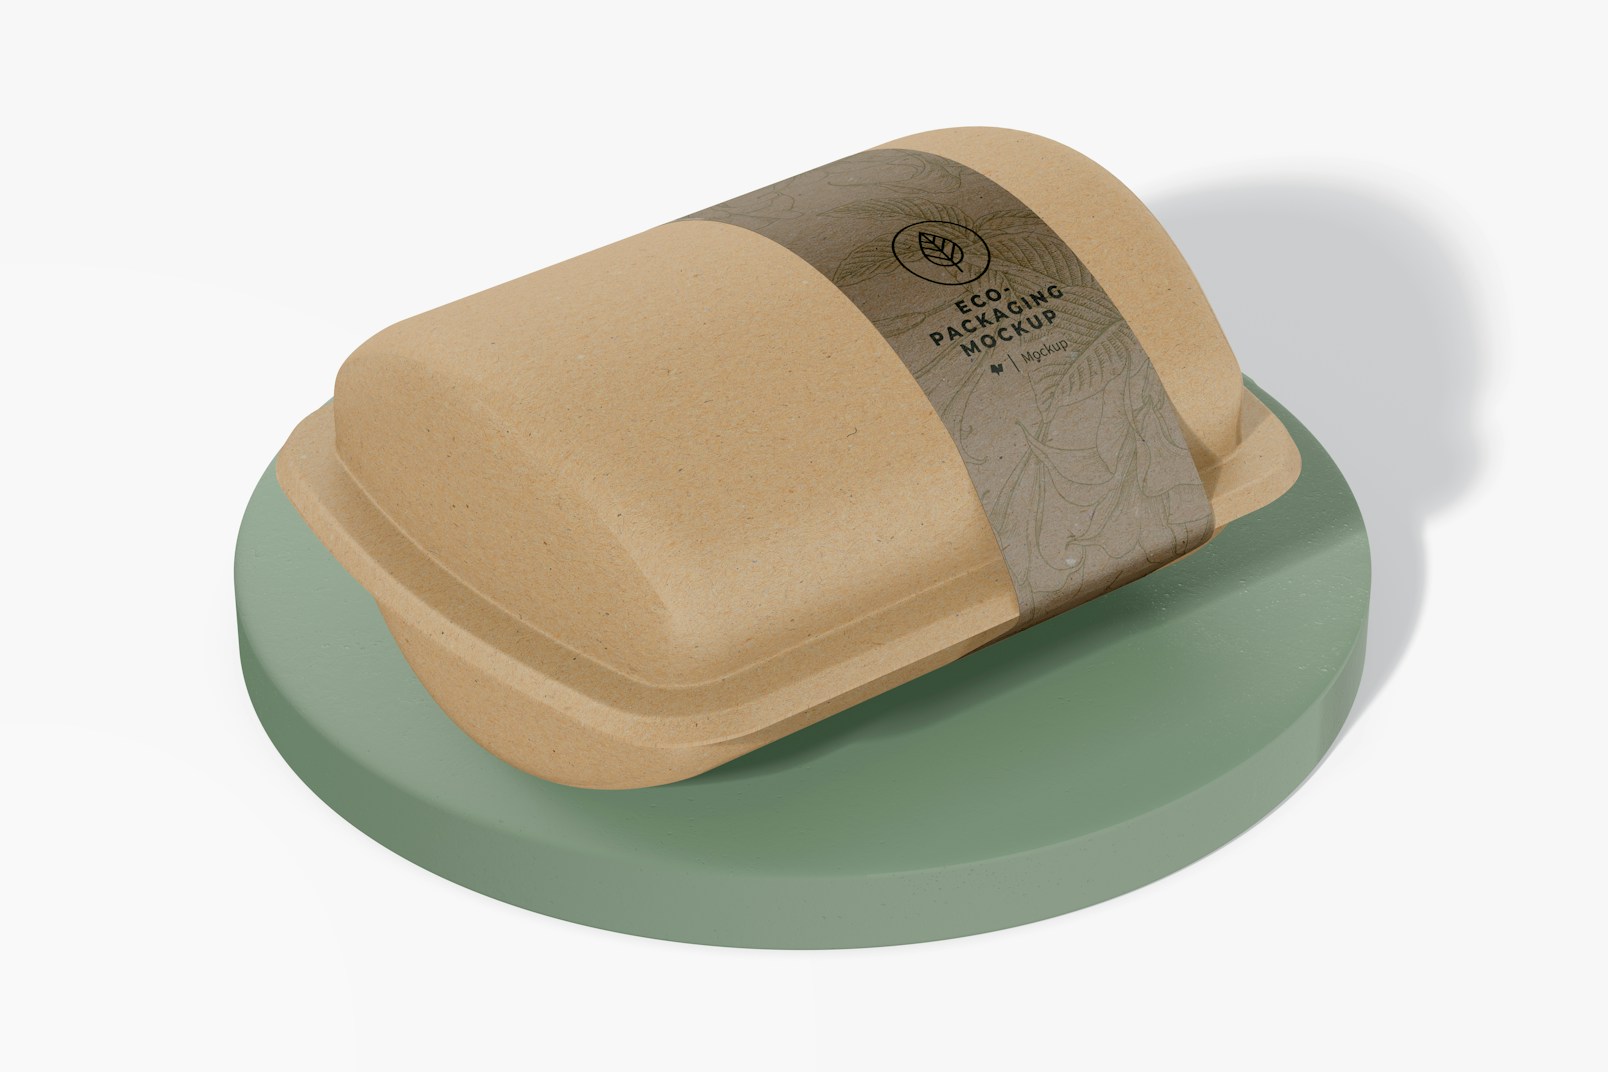 Small Biodegradable Food Packaging Mockup, Perspective